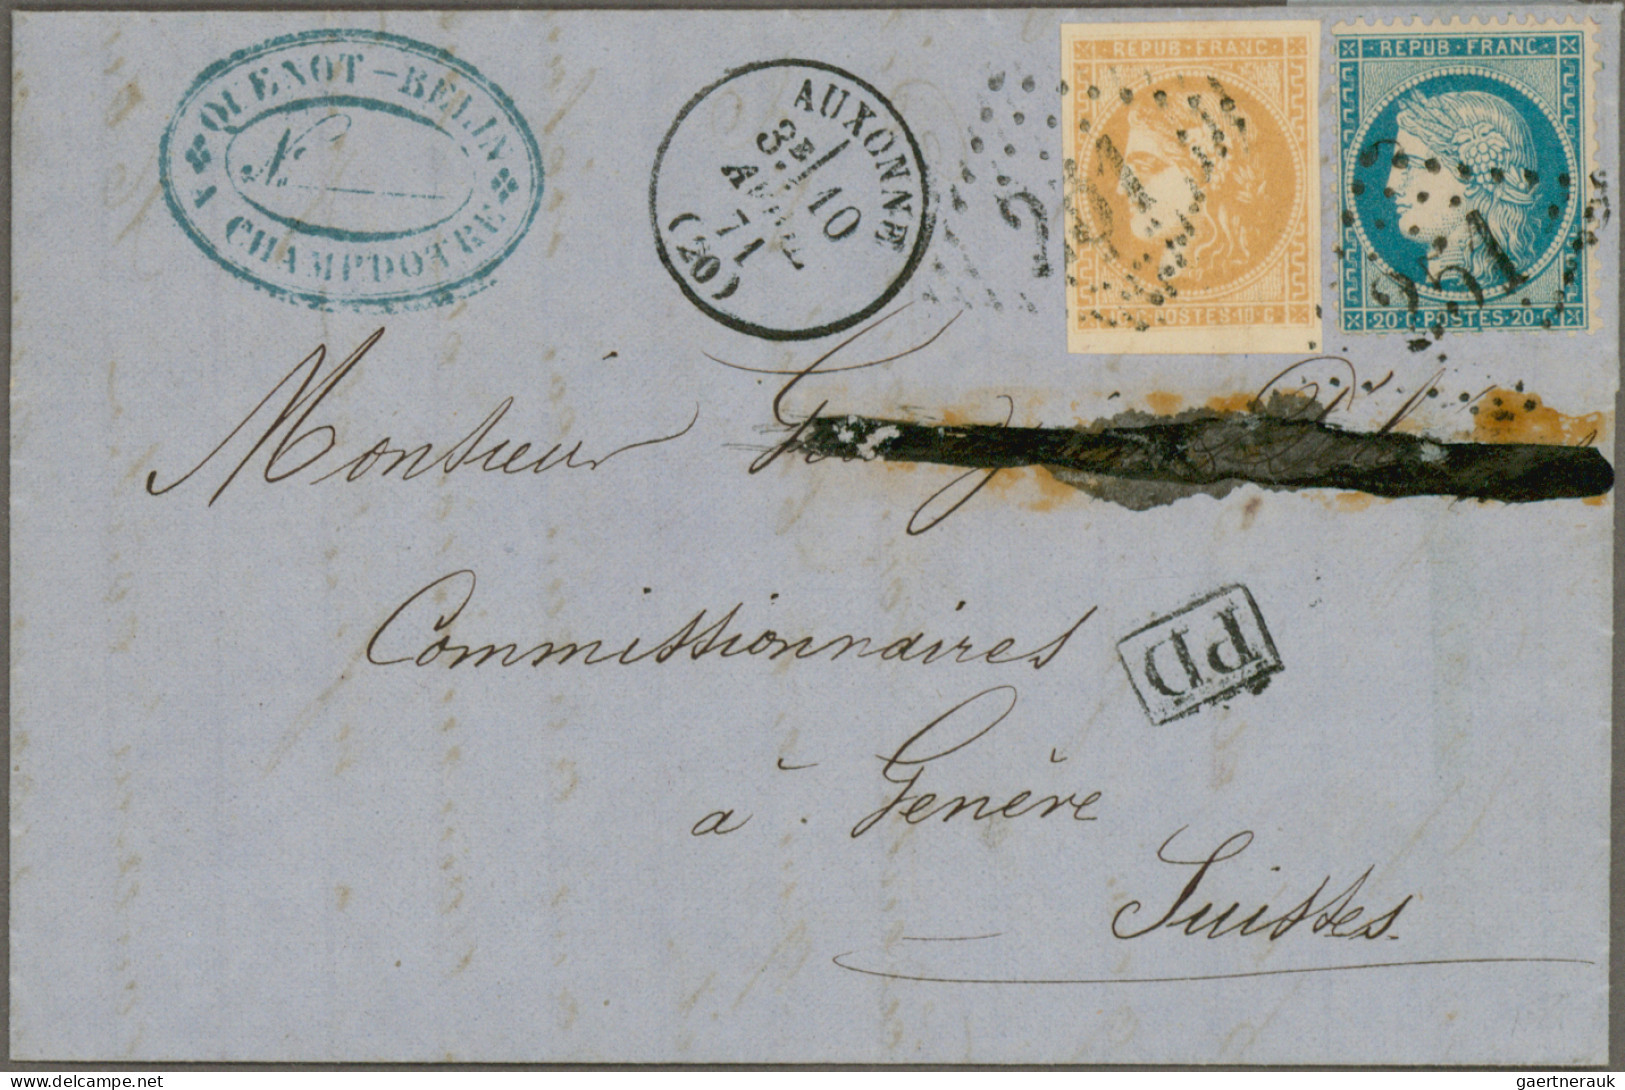 France: 1870 Bordeaux Issue: Group Of Eight Covers Franked By Imperf Ceres Stamp - Sammlungen